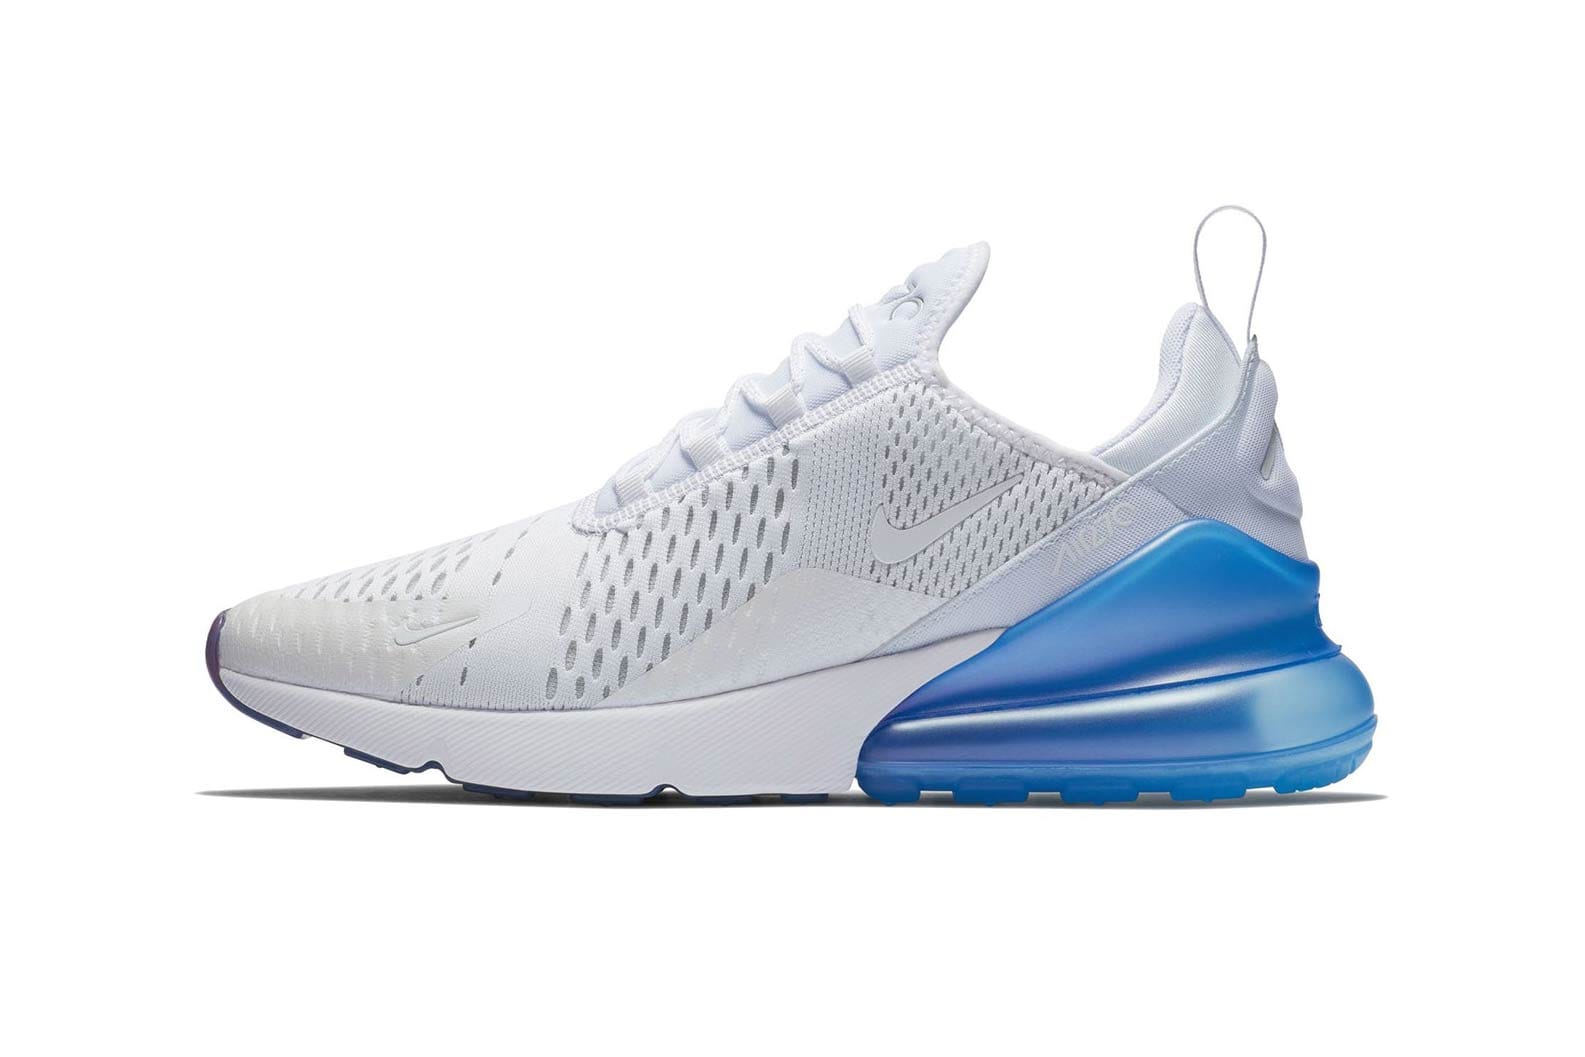 Air Max 270 in White and Blue 